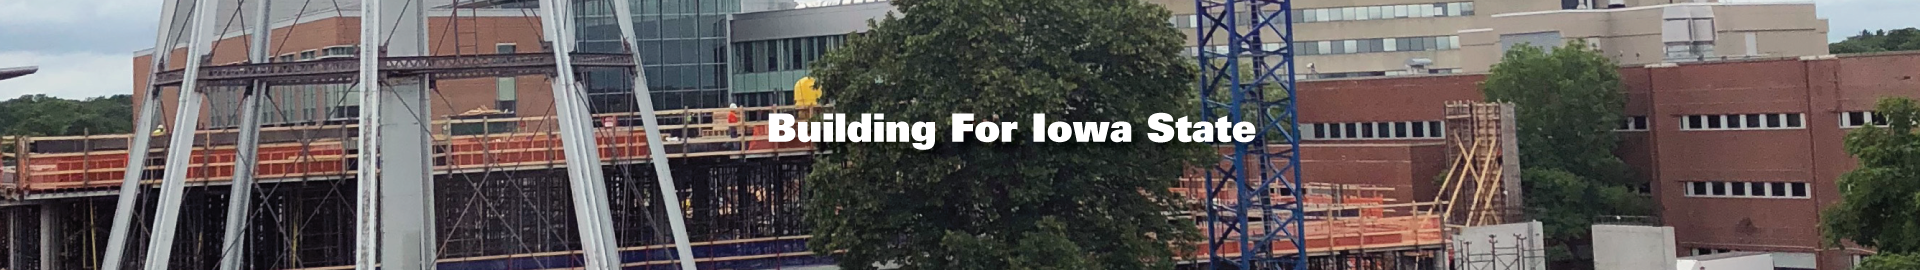 Building for Iowa State